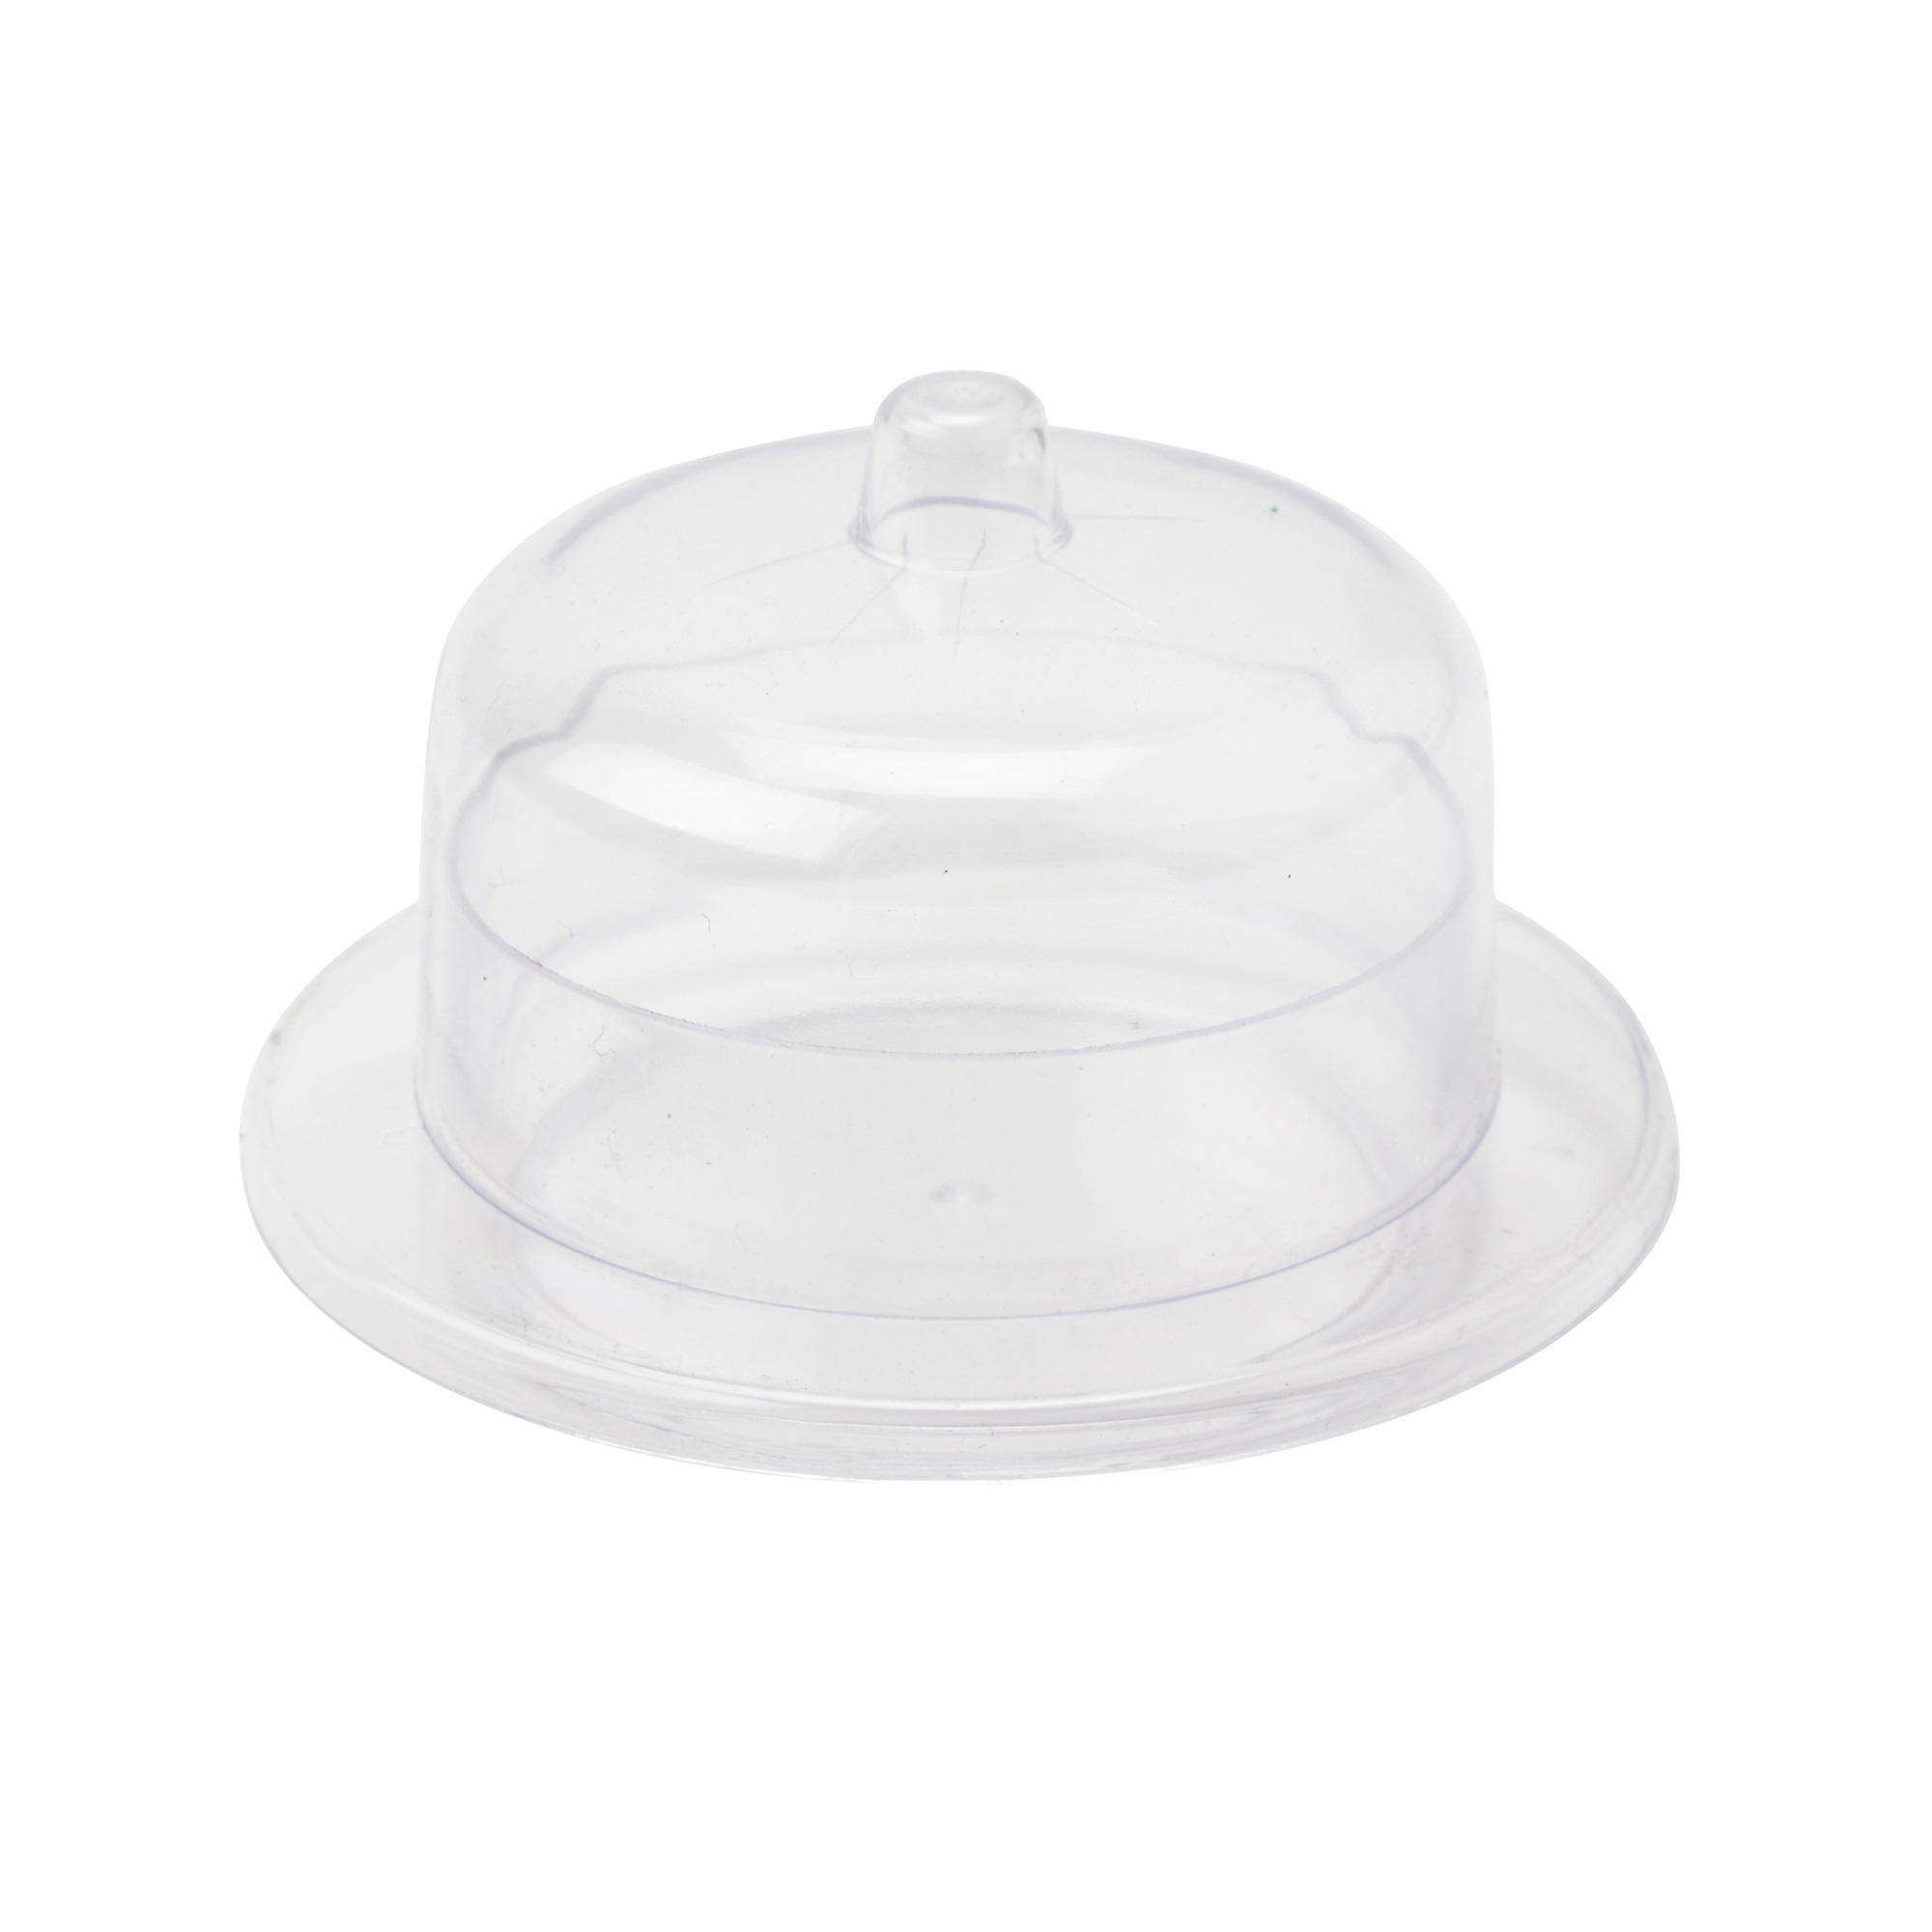 Plastic Dessert Tray with Lid 2oz 6pc/box - Clear